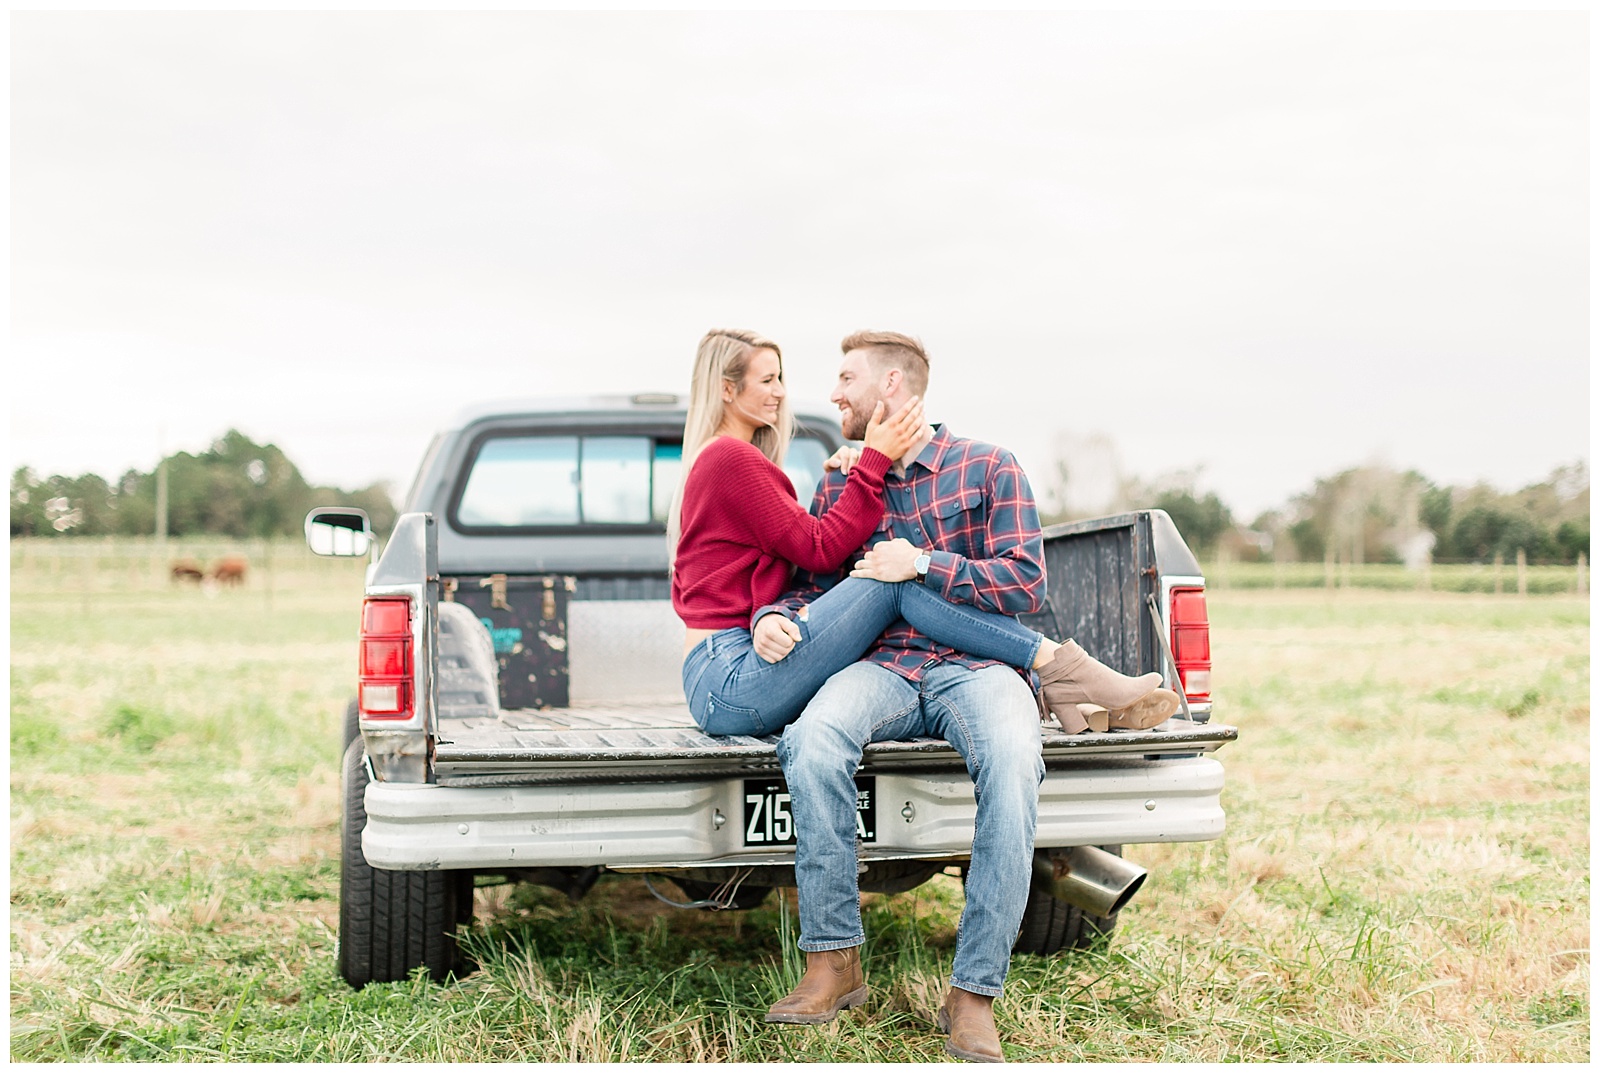 cullipher-farms-engagement-session-49.jpg